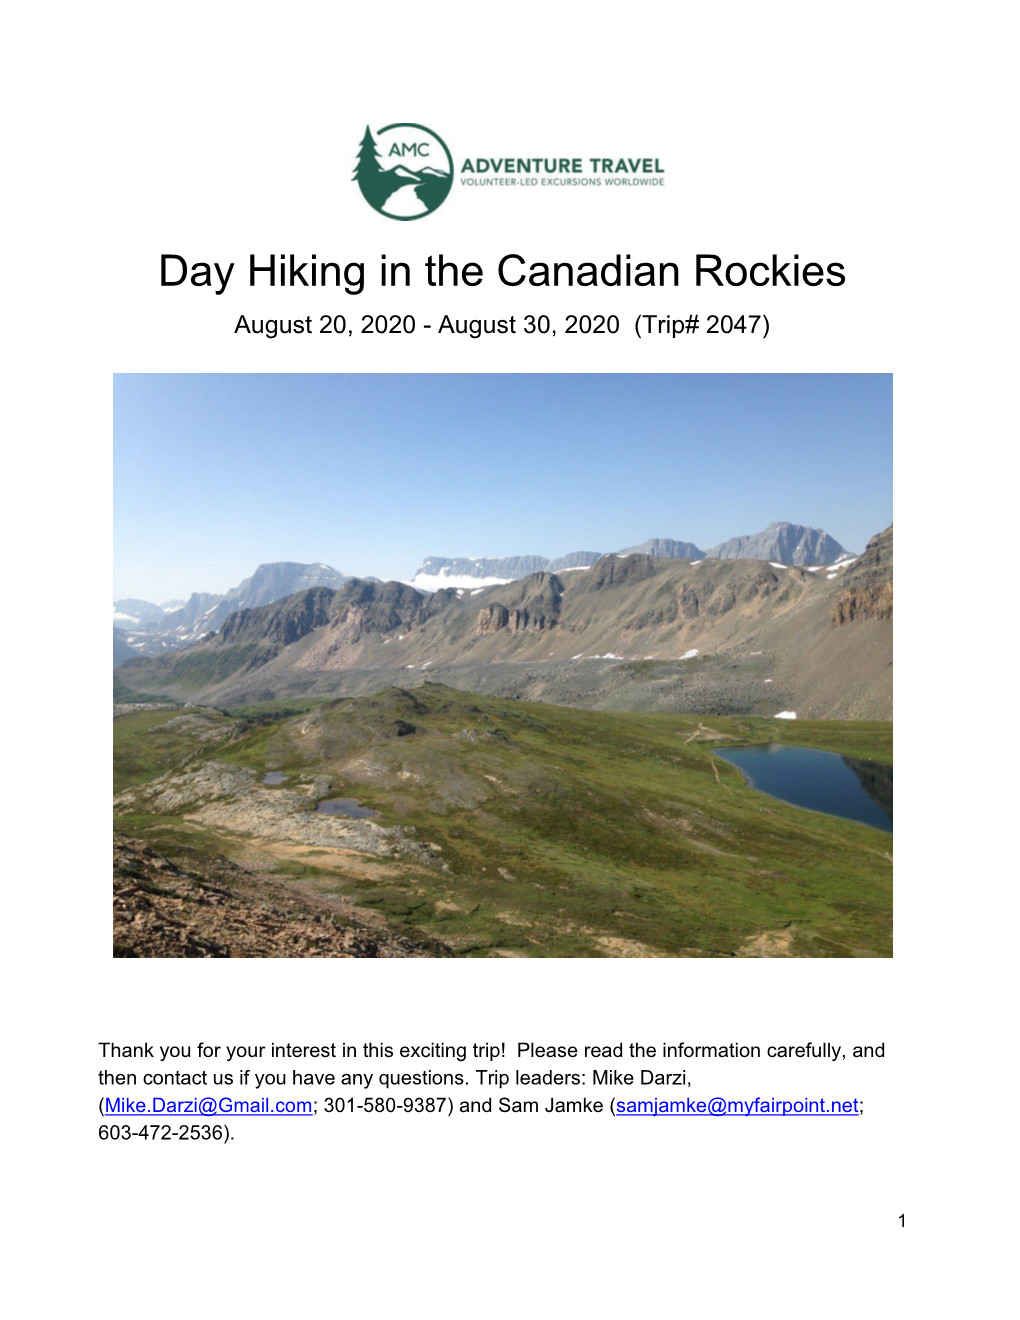 Day Hiking in the Canadian Rockies August 20, 2020 - August 30, 2020 (Trip# 2047)